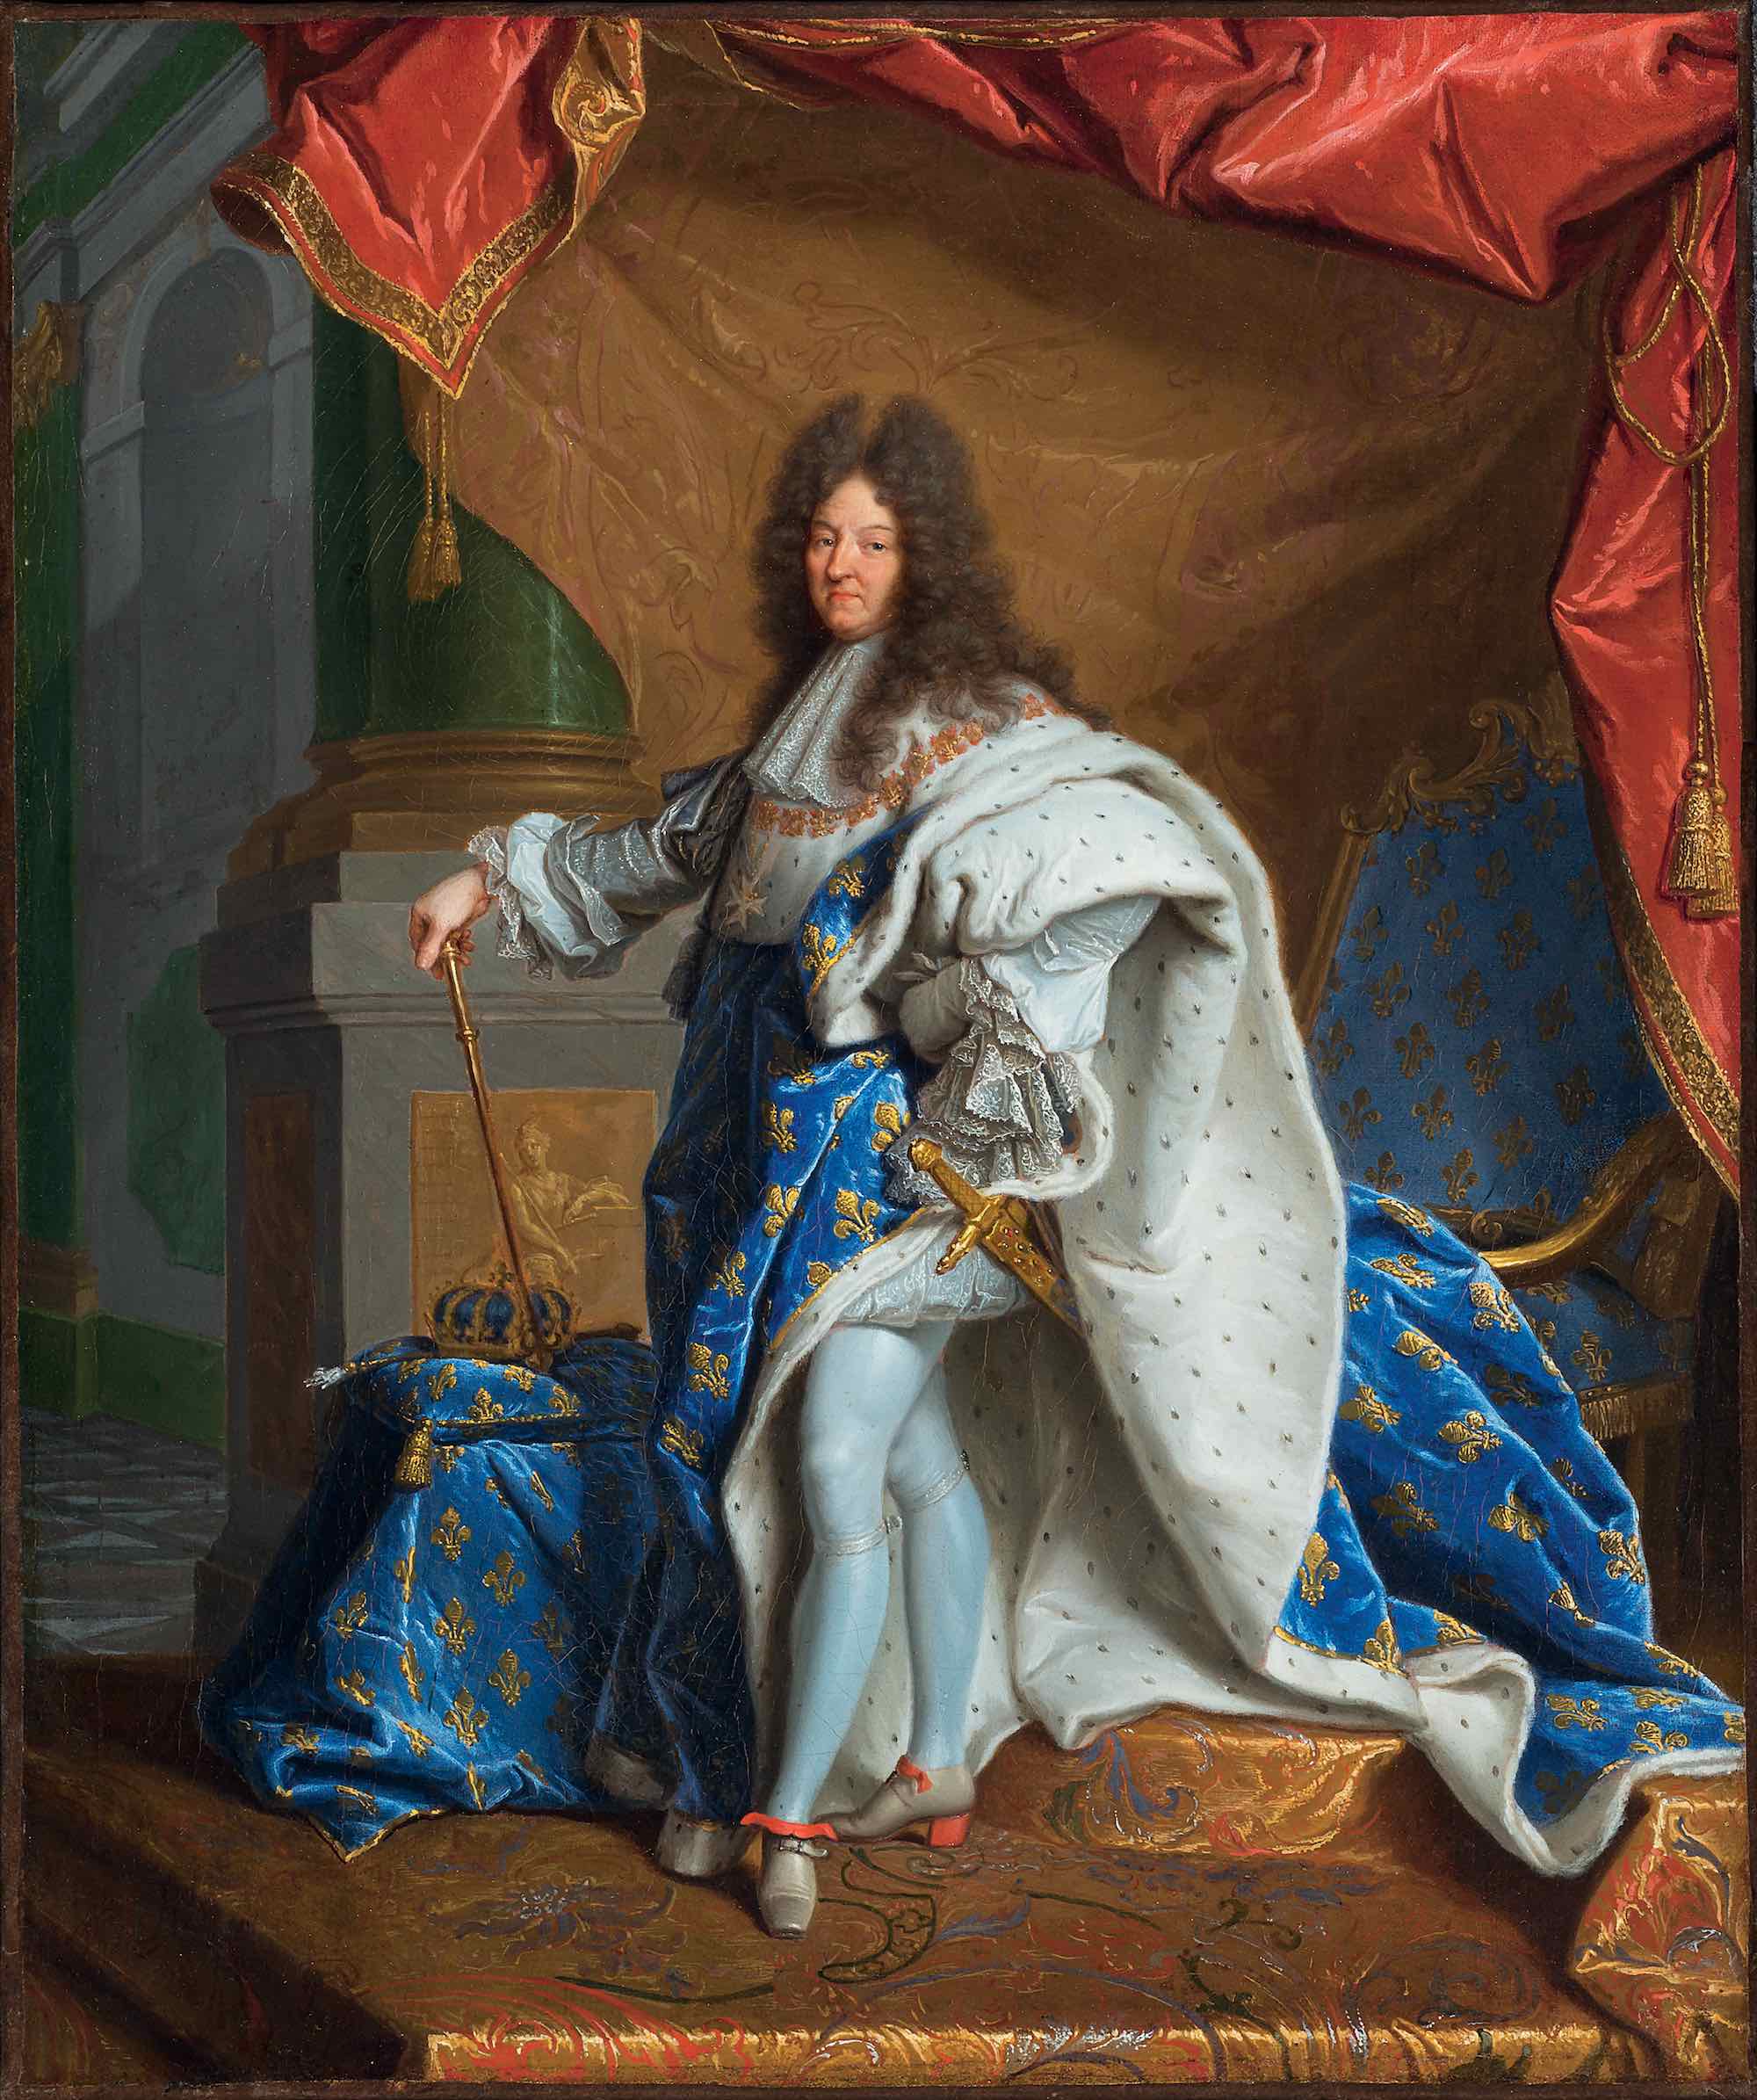 Montreal Acquires Rigaud’s Modello for Portrait of Louis XIV | Enfilade